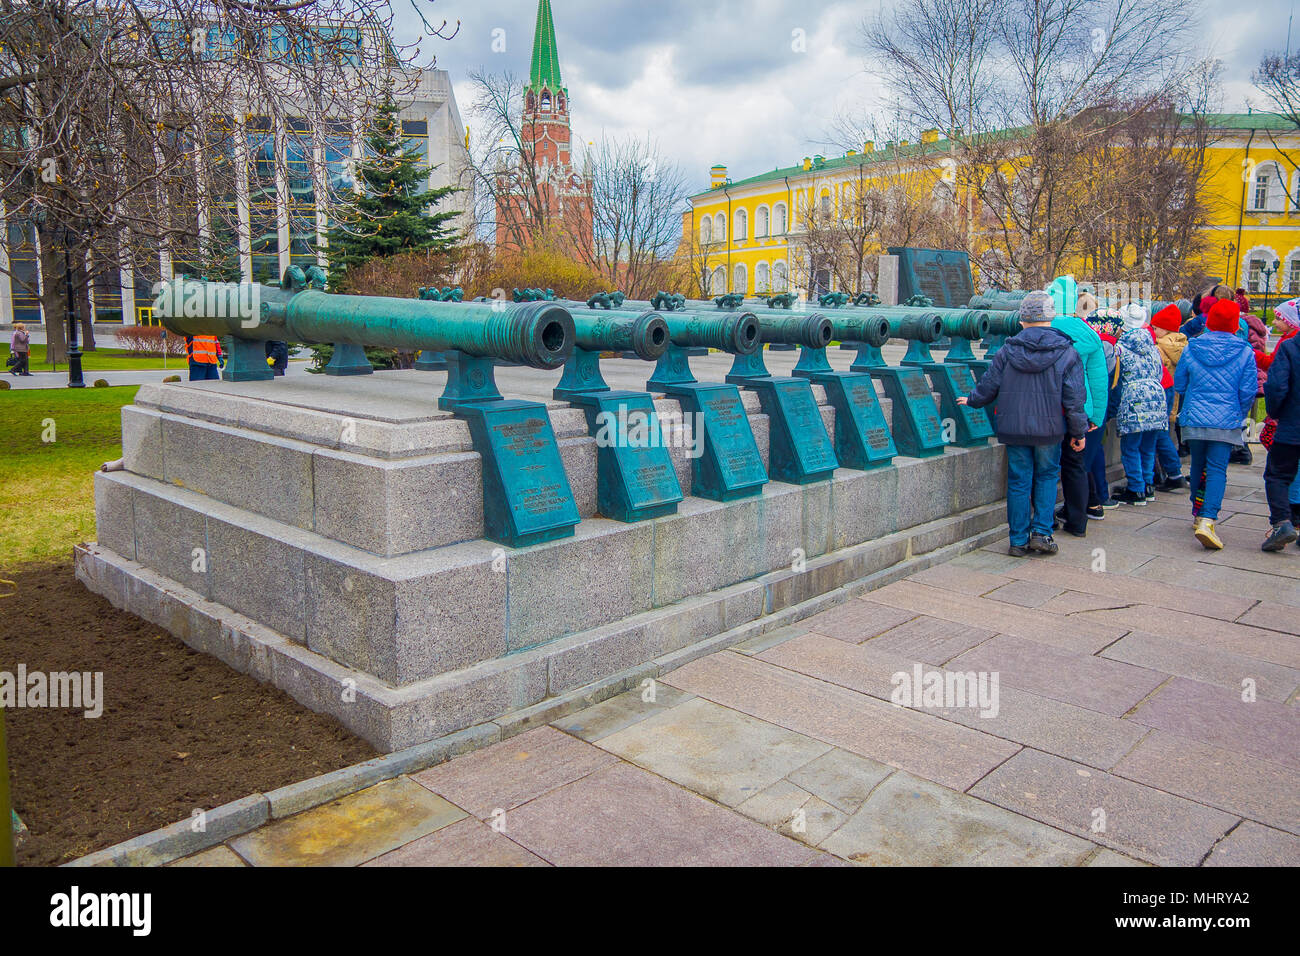 MOSCOW, RUSSIA- APRIL, 24, 2018: People walking close to old military trunks of ancient cannons. Collection incorporates old Russian and foreign cannons of XVI-XIX centuries shown in the Moscow Kremlin Stock Photo